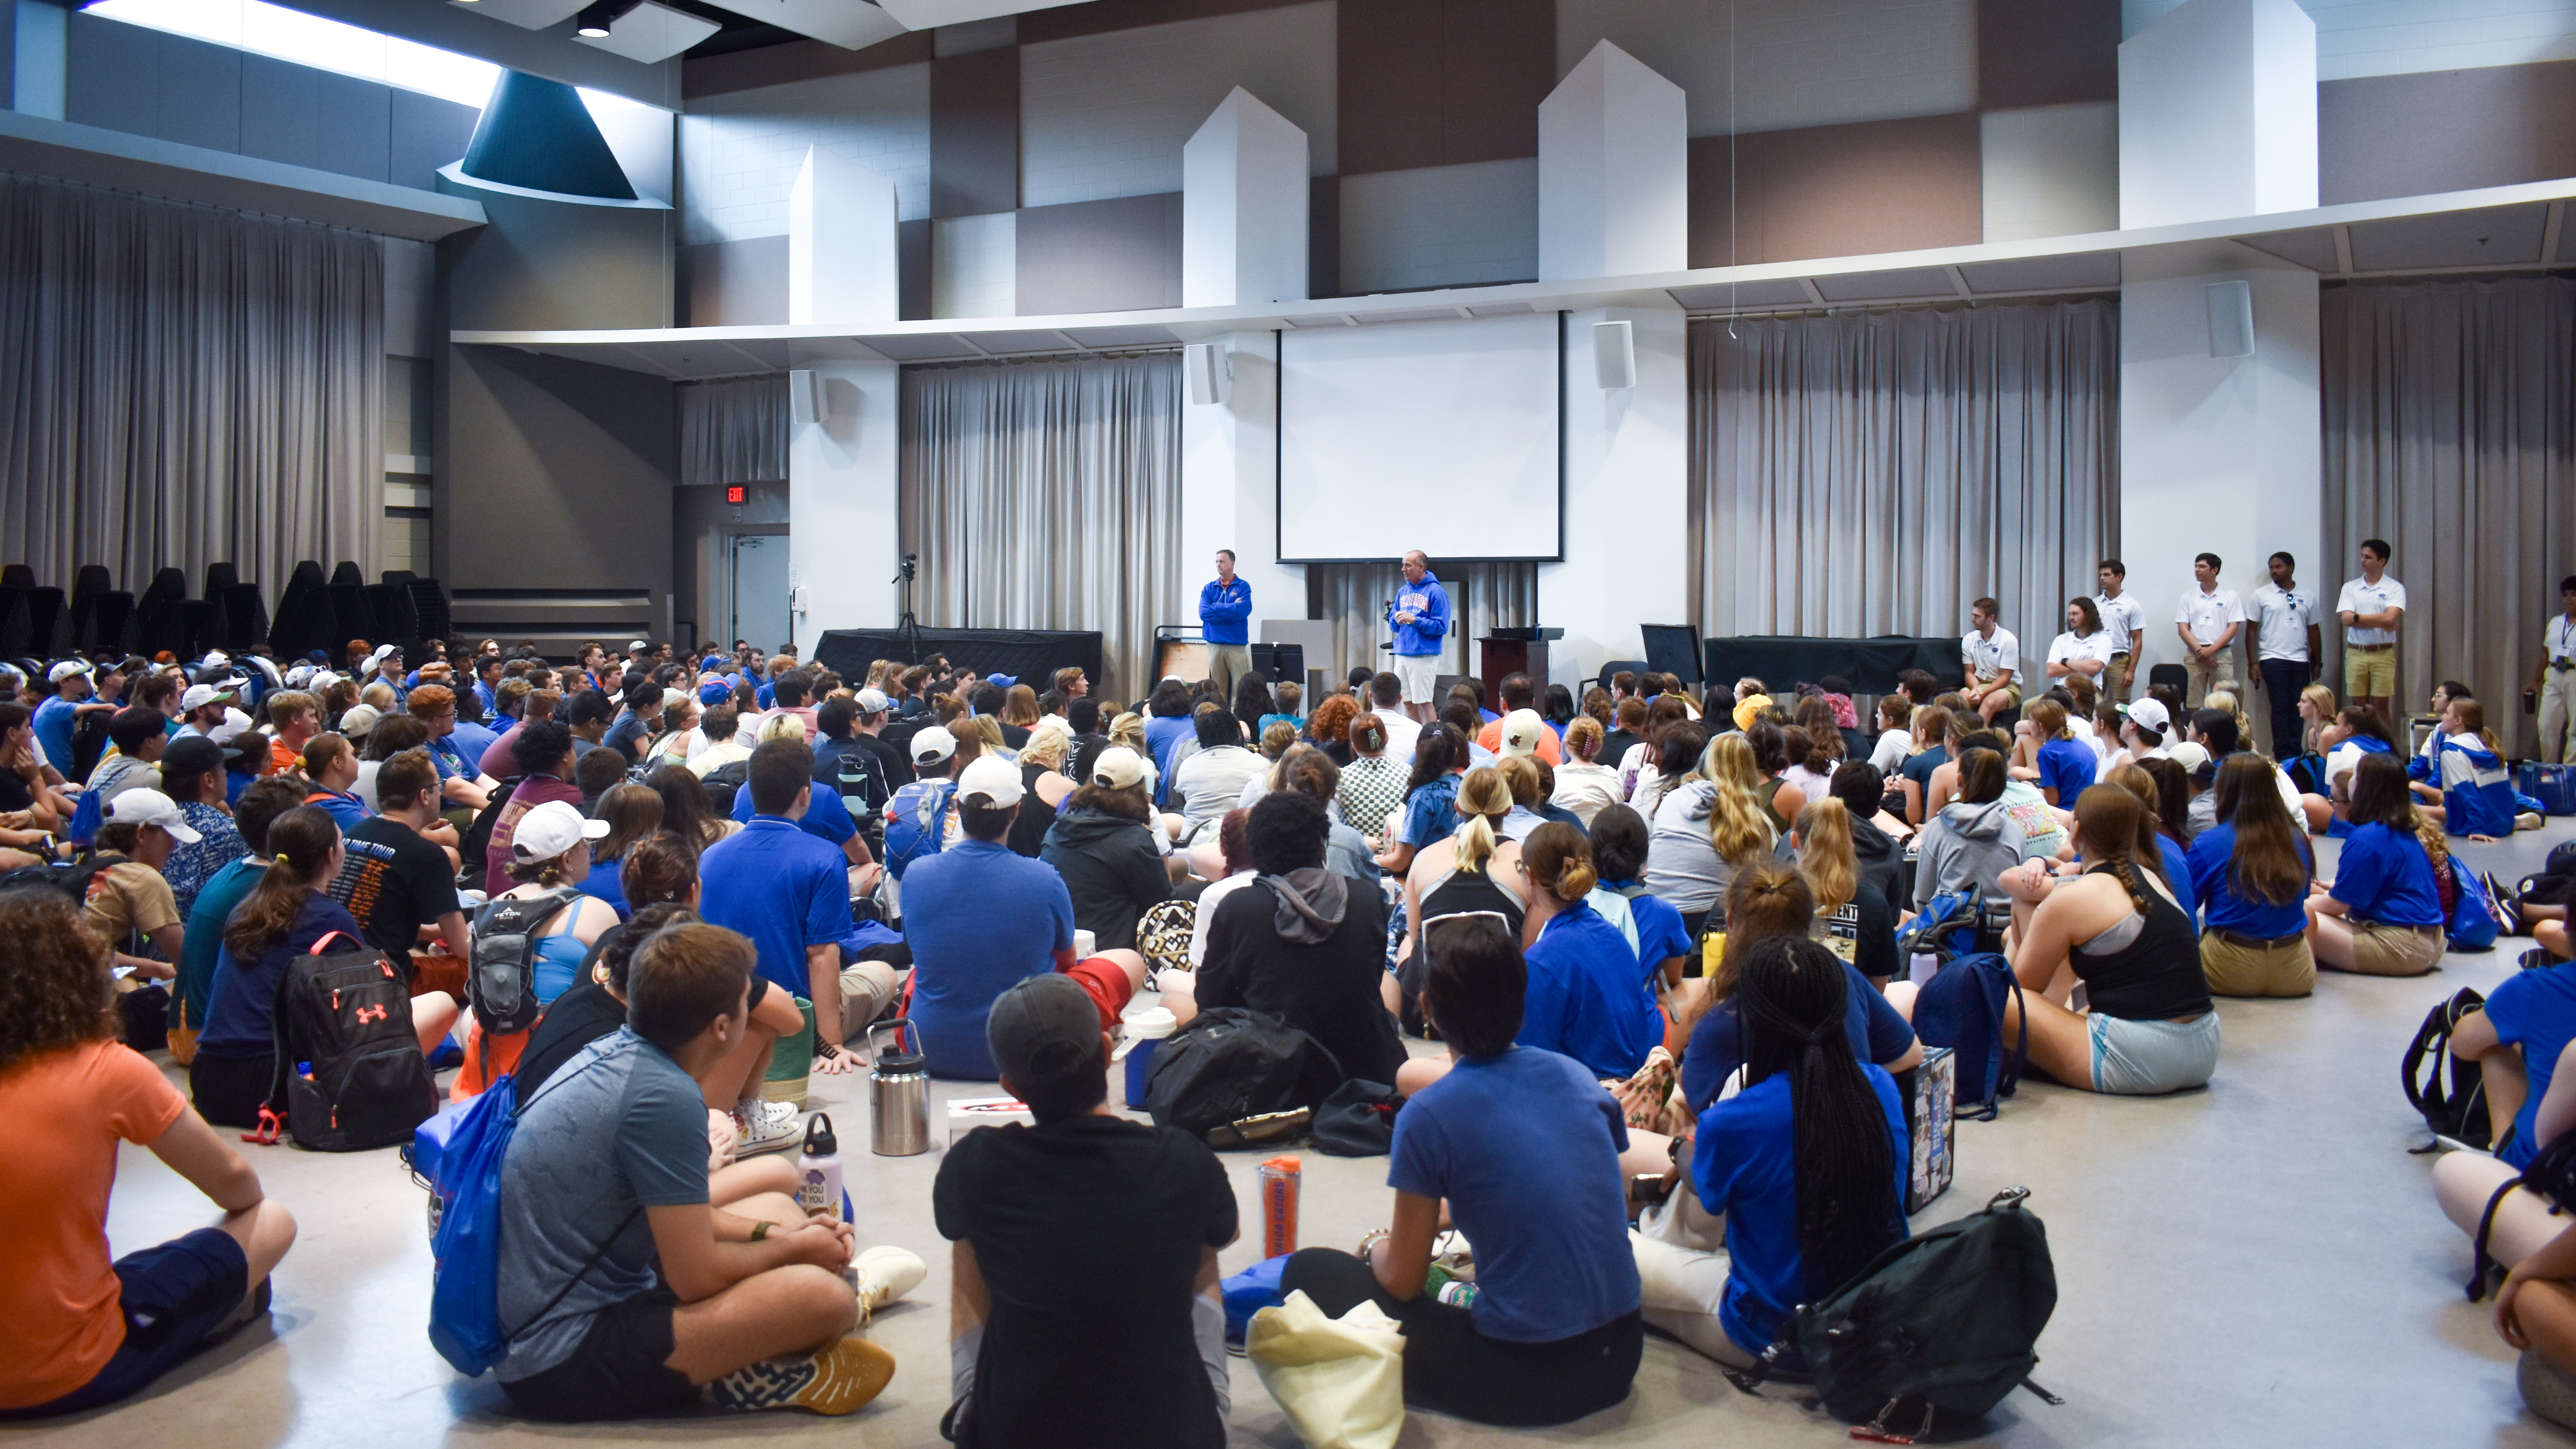 A large group of students sit on the floor inside listening to two professors speak.